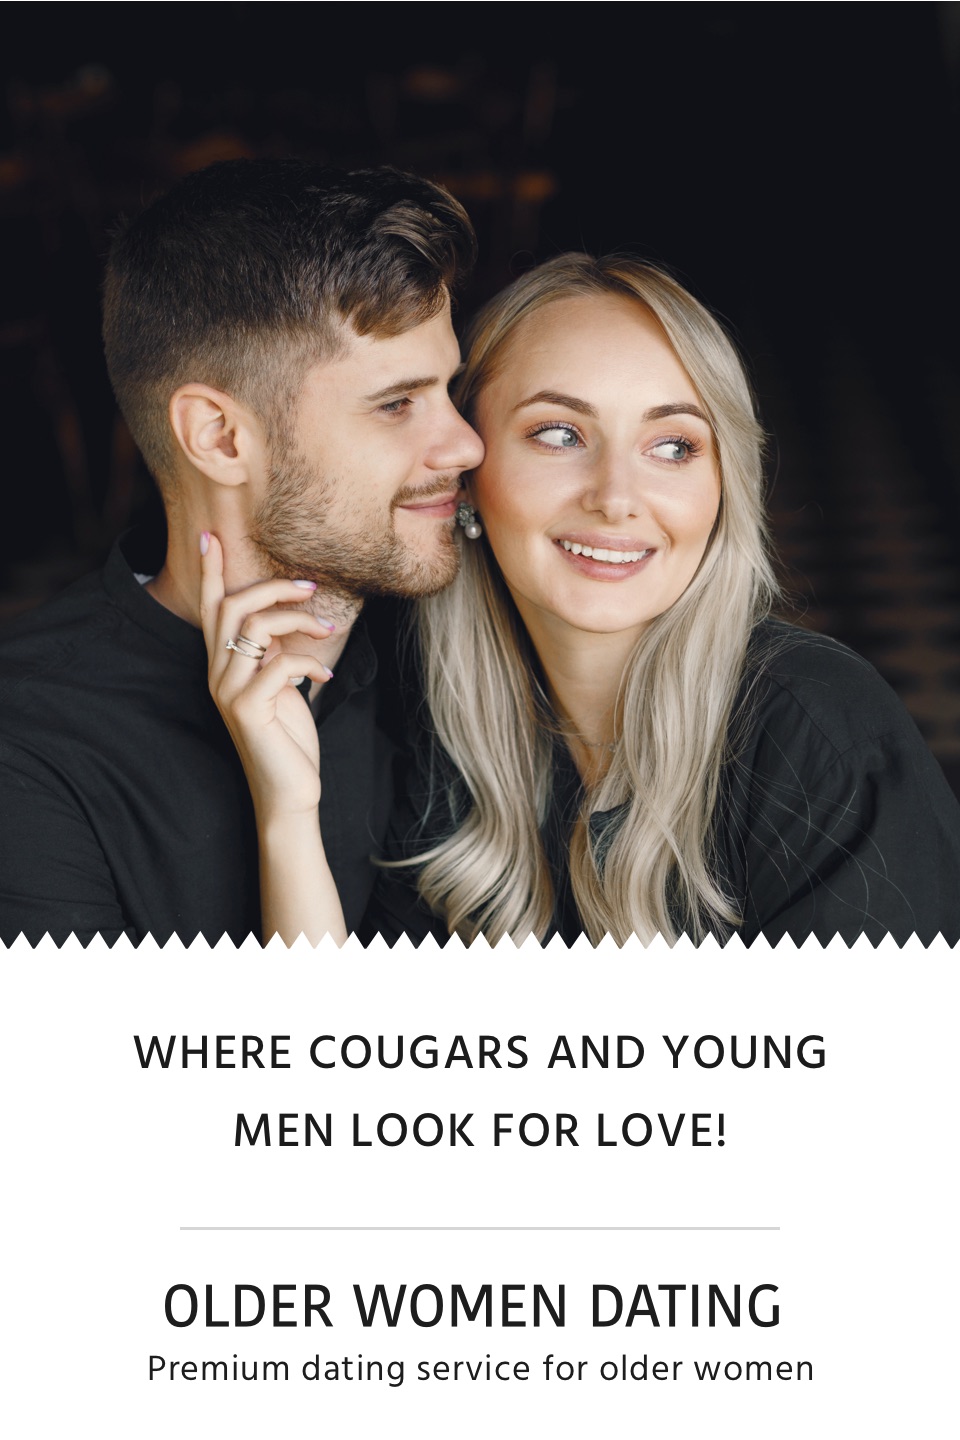 OlderWomenDating - the best cougar dating site!